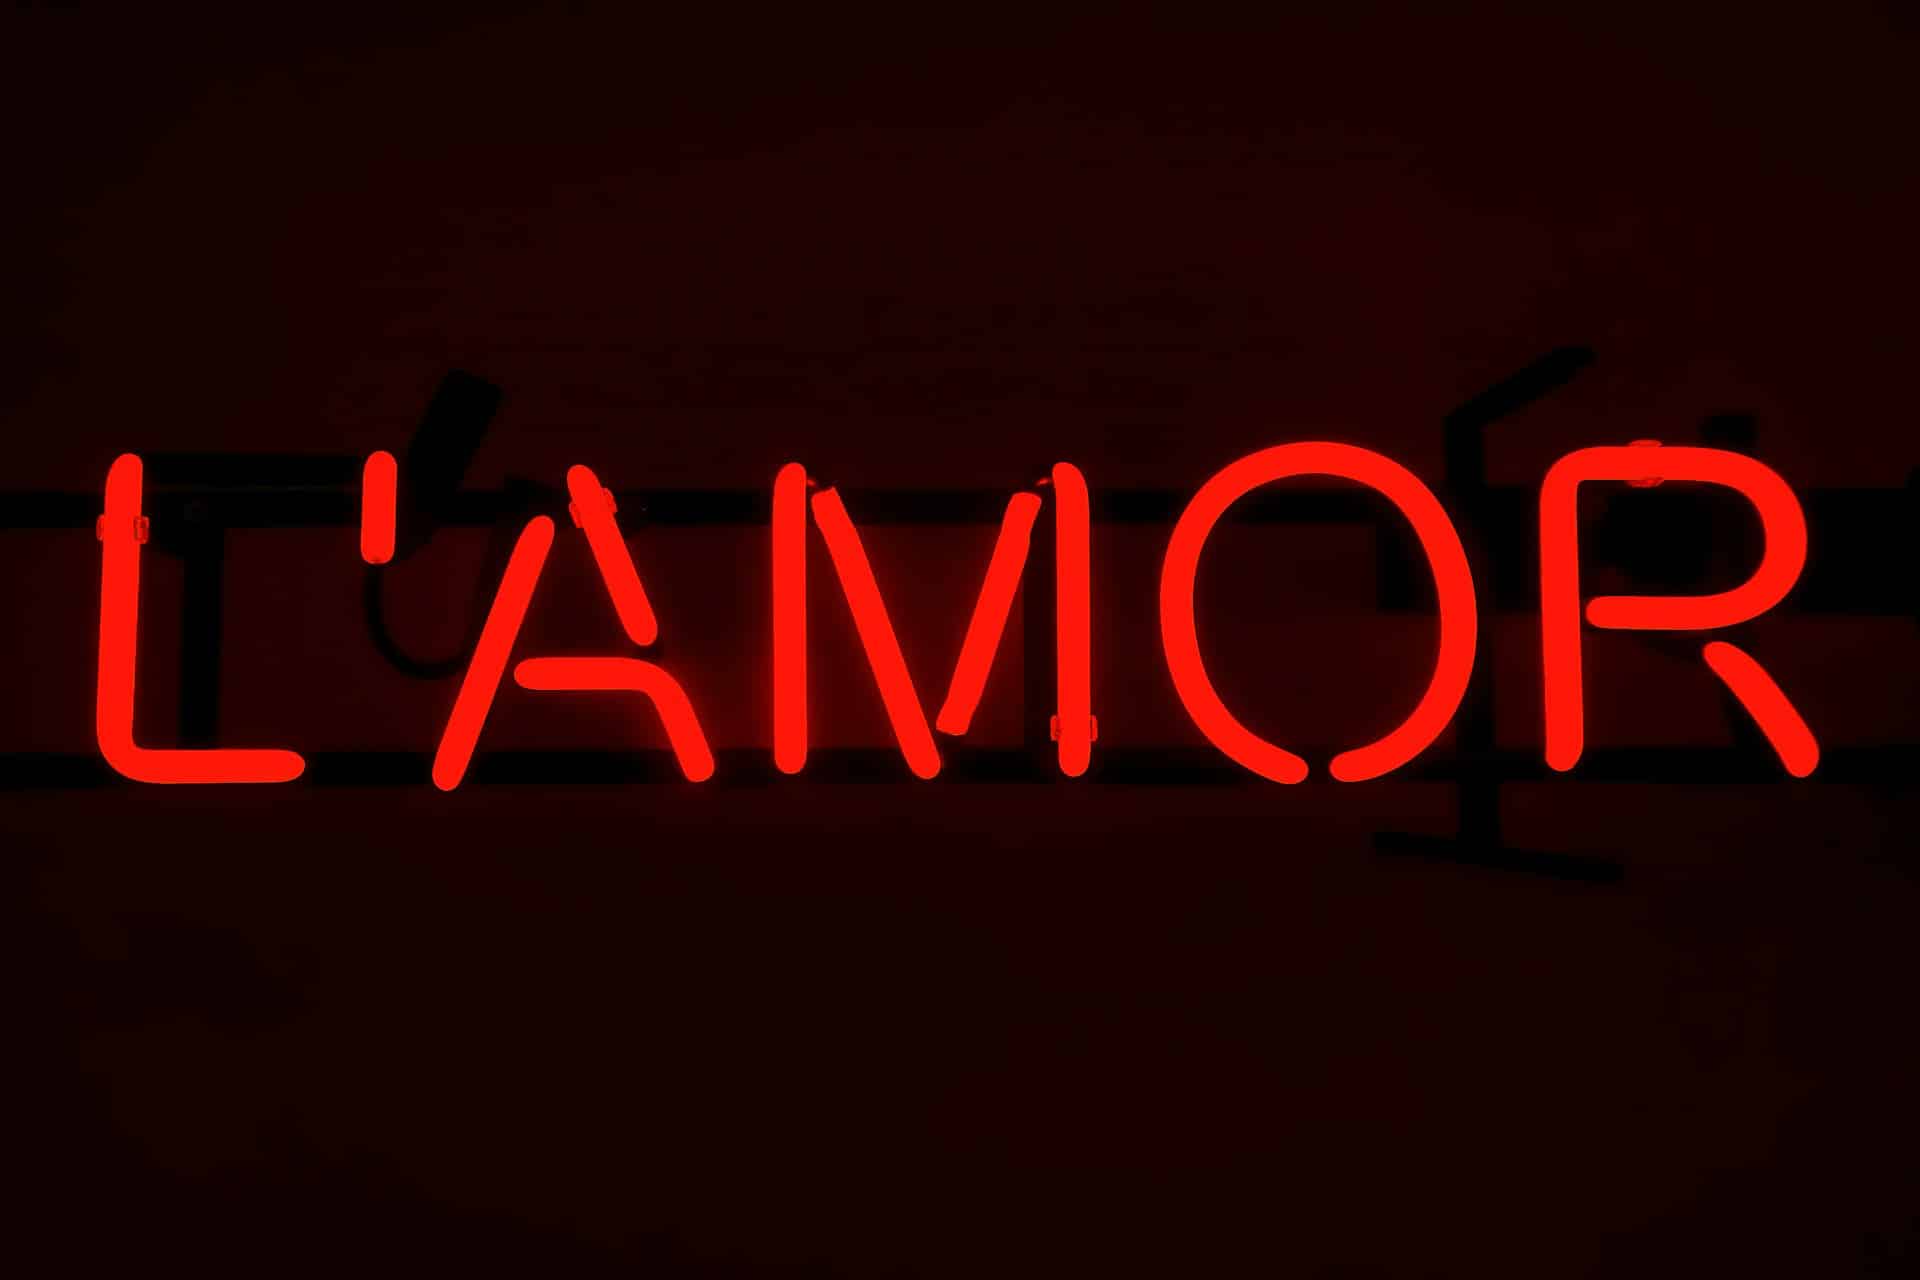 red-neon-sign-of-the-words-l'amor